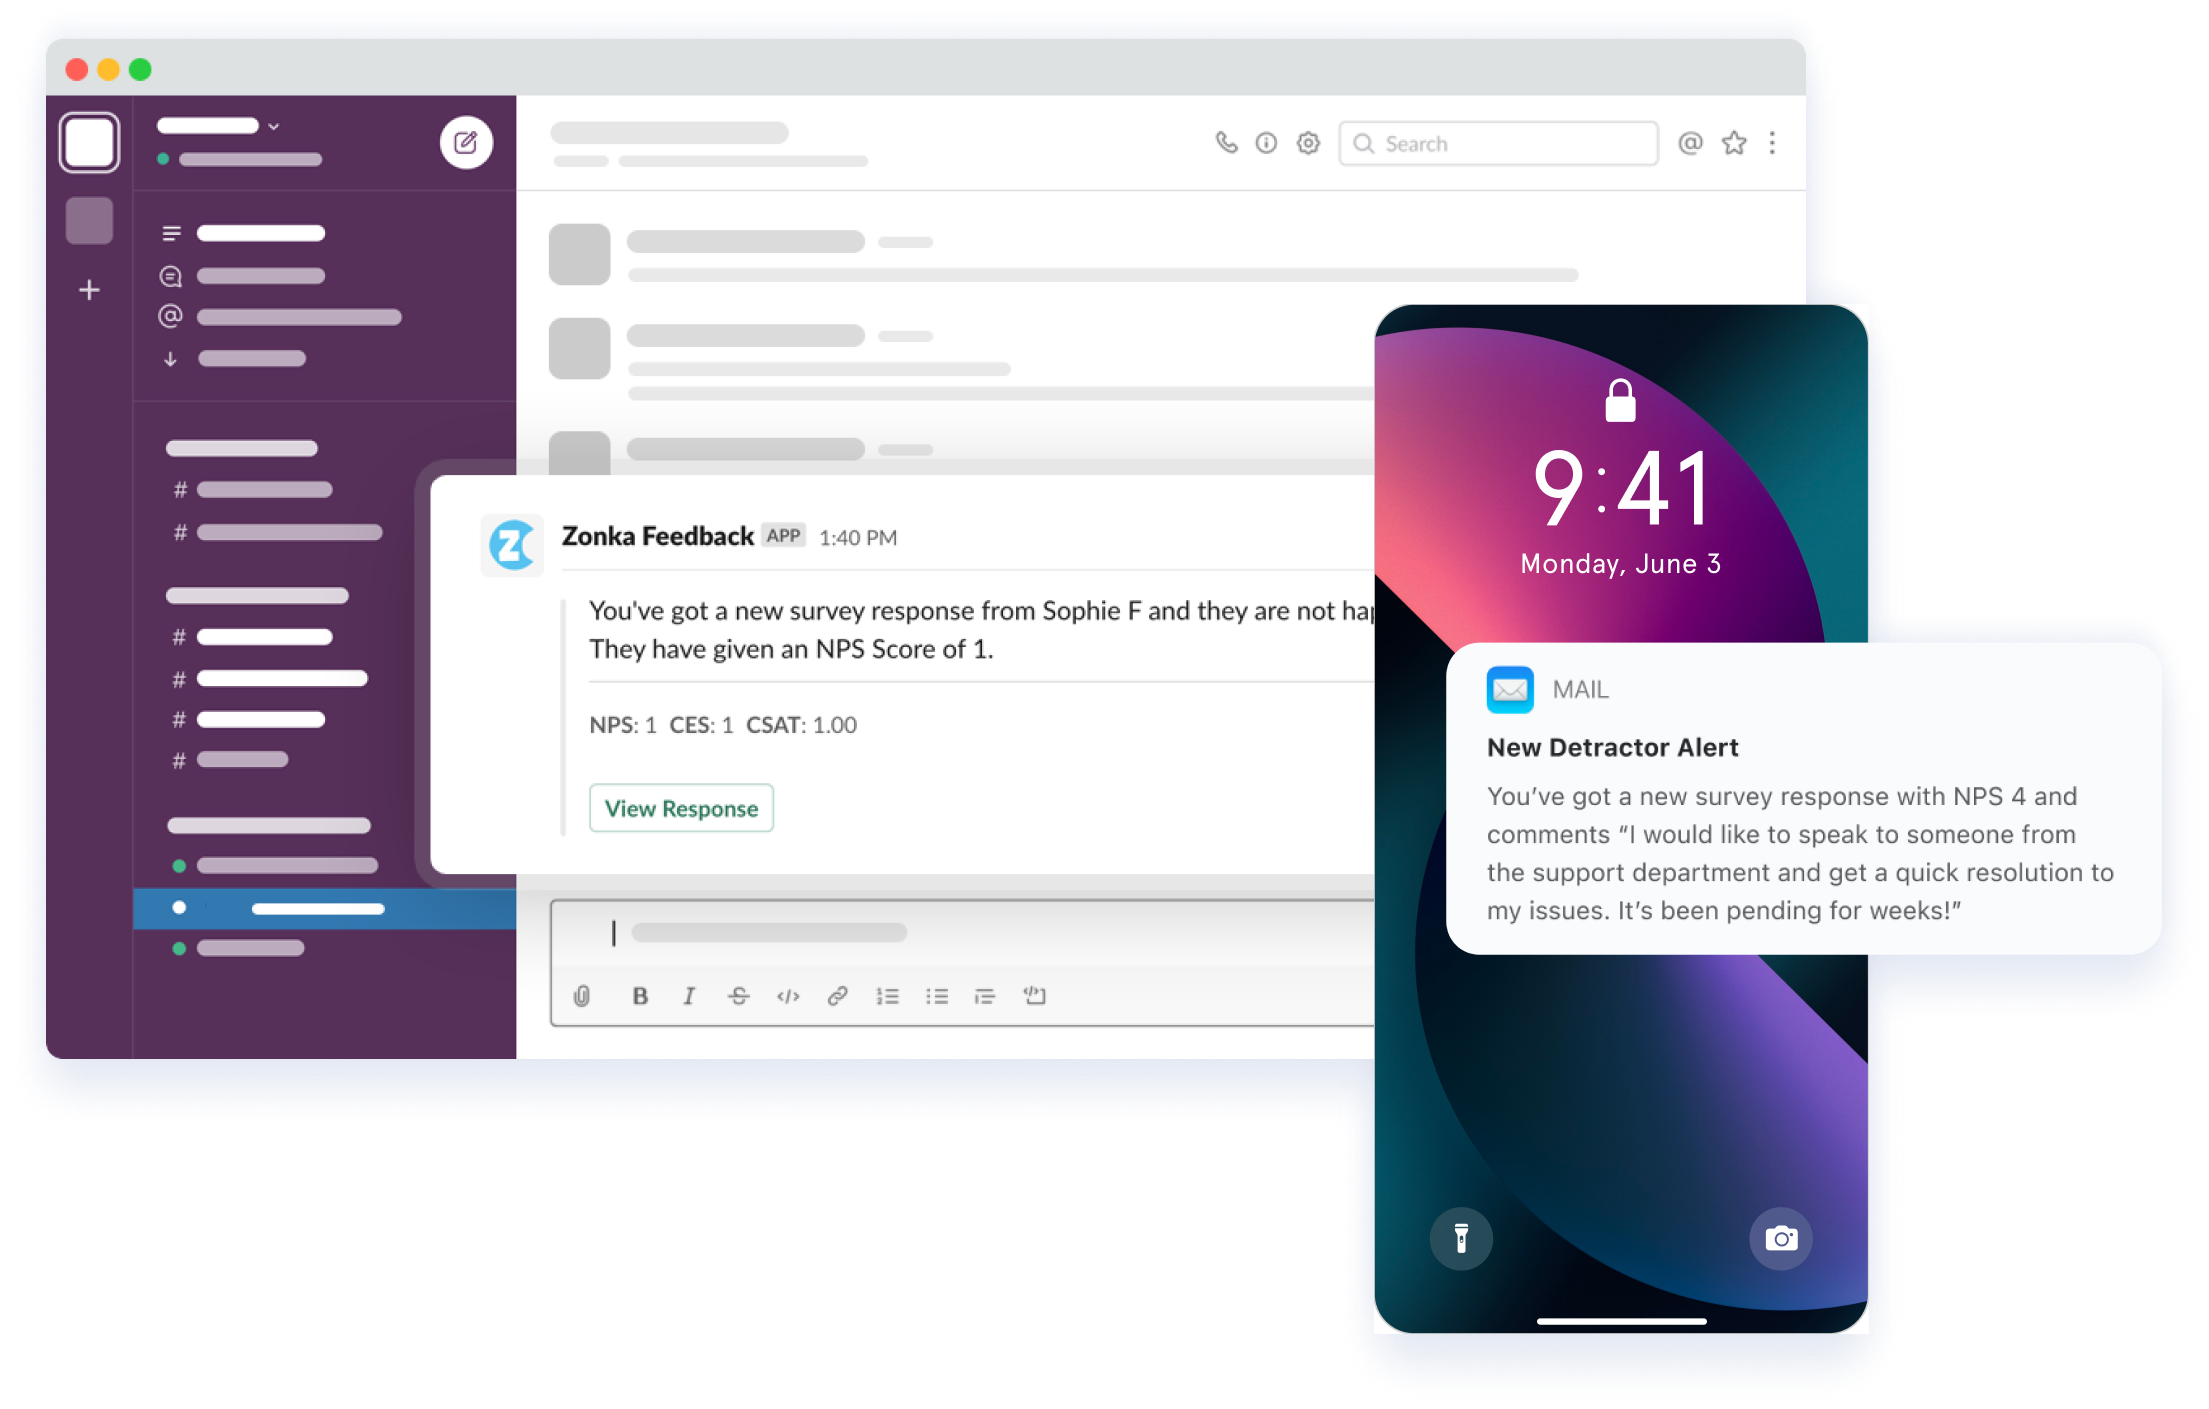 Real-time Feedback Notifications & Alerts